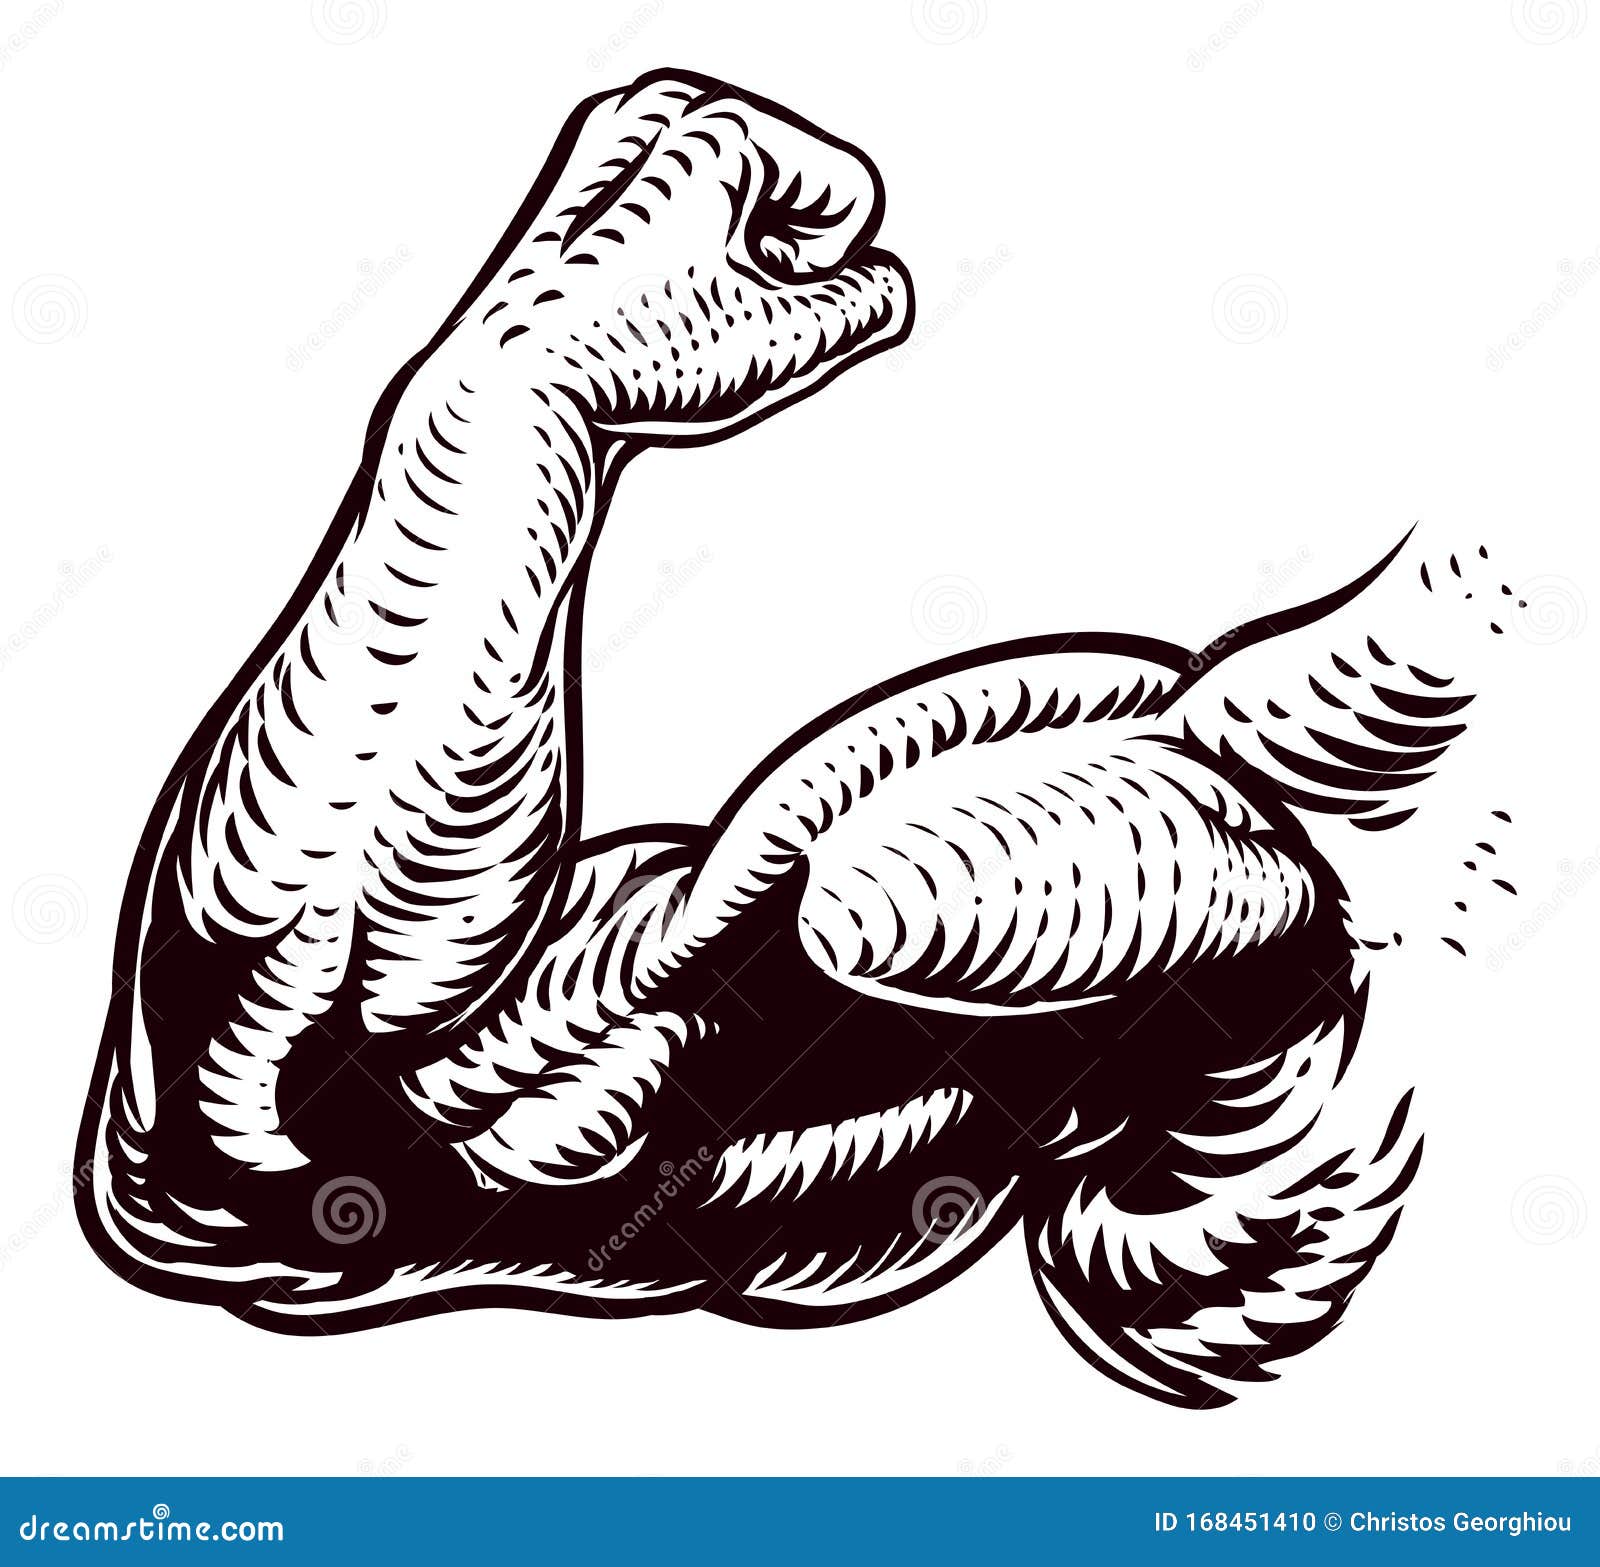 https://thumbs.dreamstime.com/z/strong-arm-muscle-illustration-illustration-strong-arm-showing-muscle-vintage-retro-woodcut-style-168451410.jpg